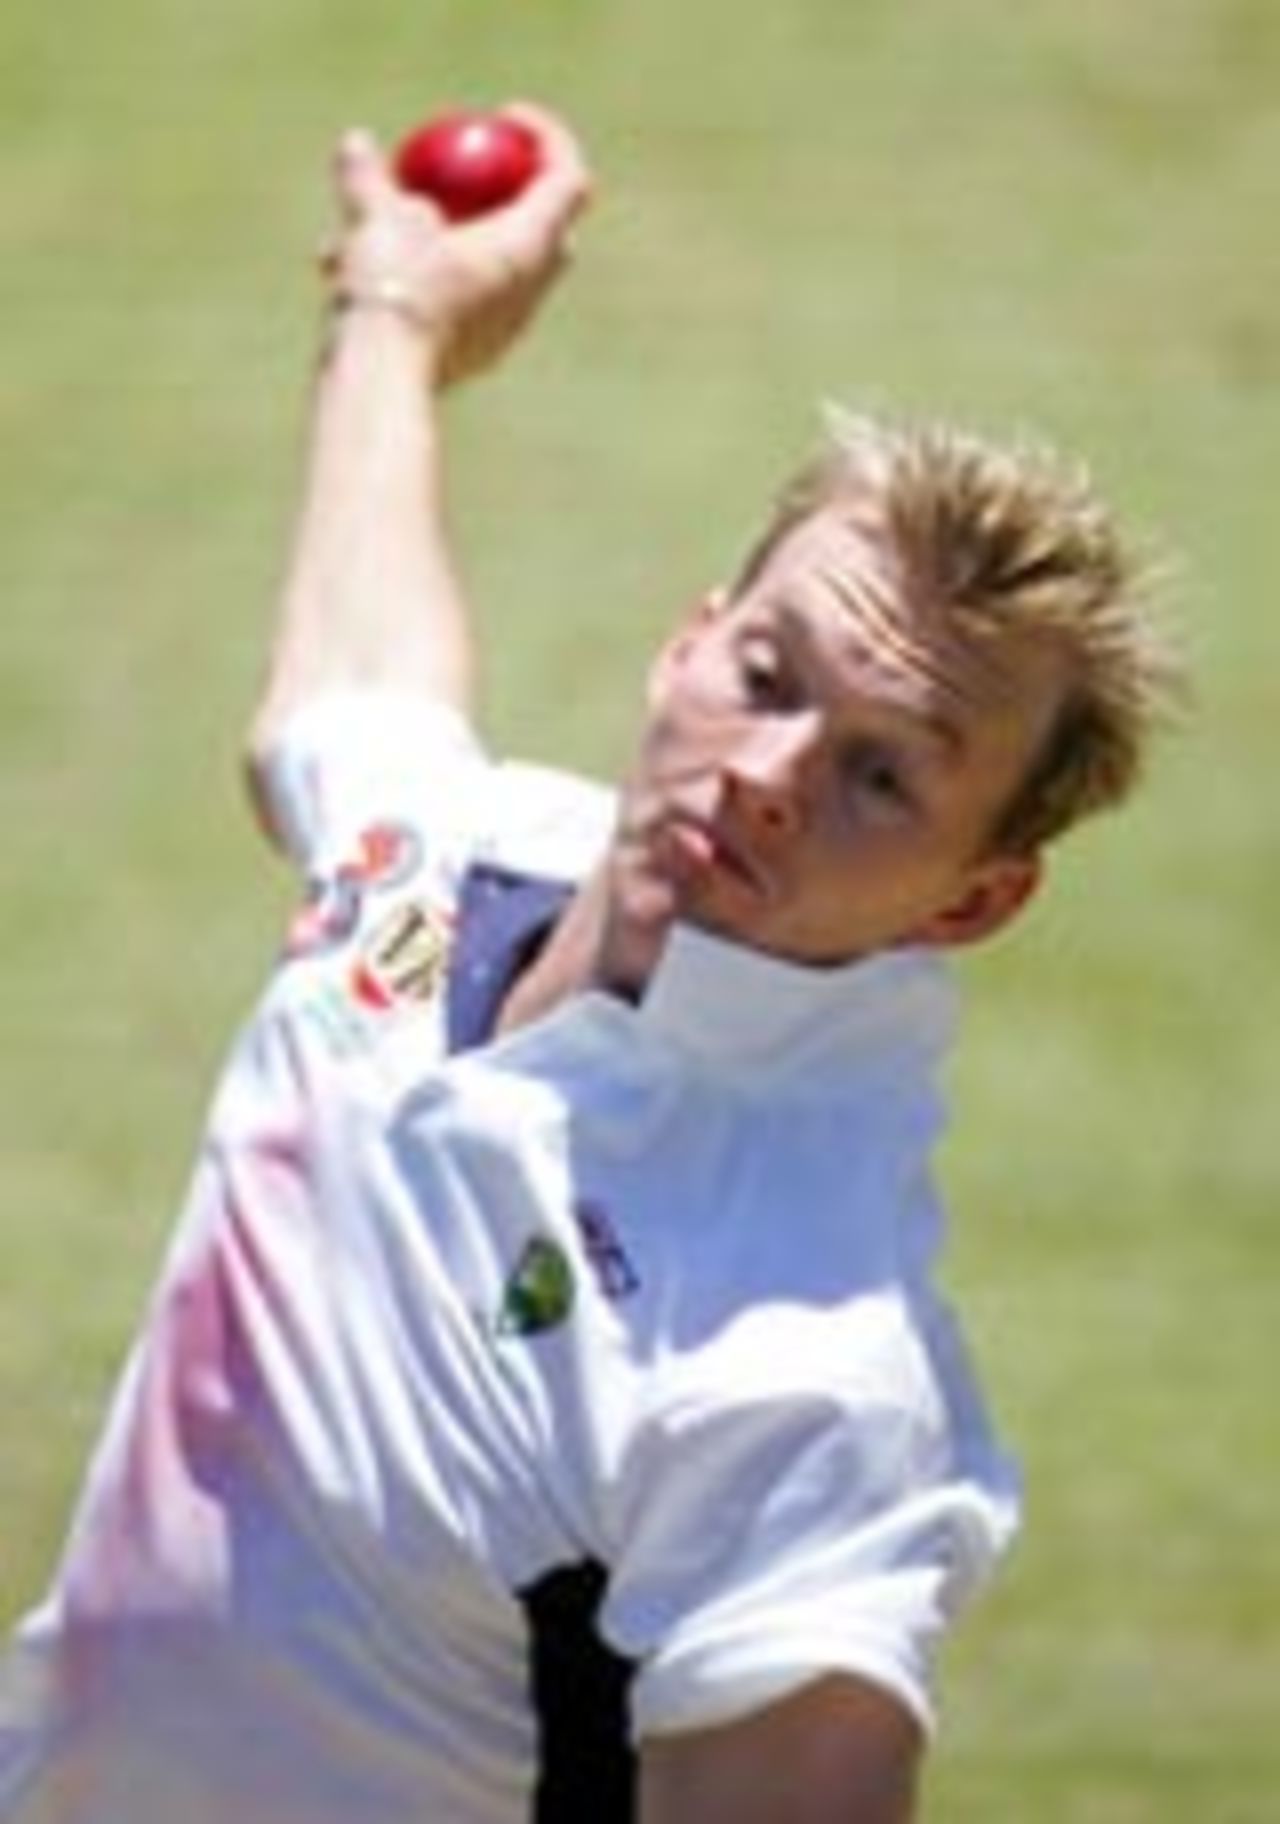 Brett Lee bowling in the nets at Perth, December 13, 2004